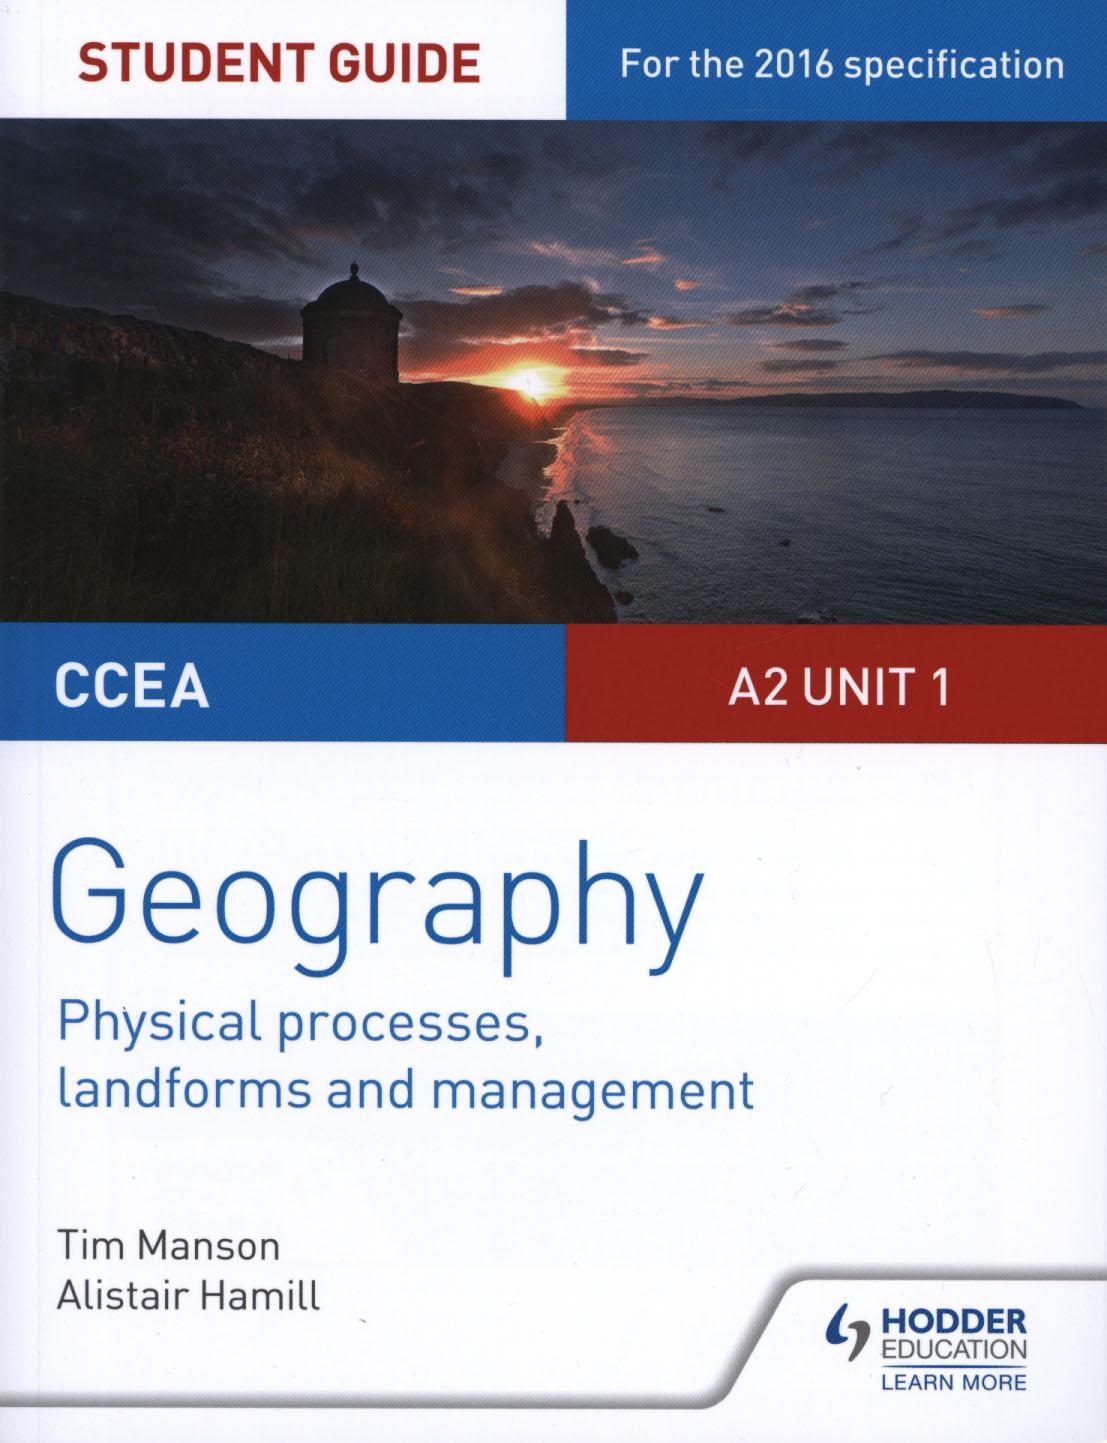 CCEA A2 Unit 1 Geography Student Guide 4: Physical Processes